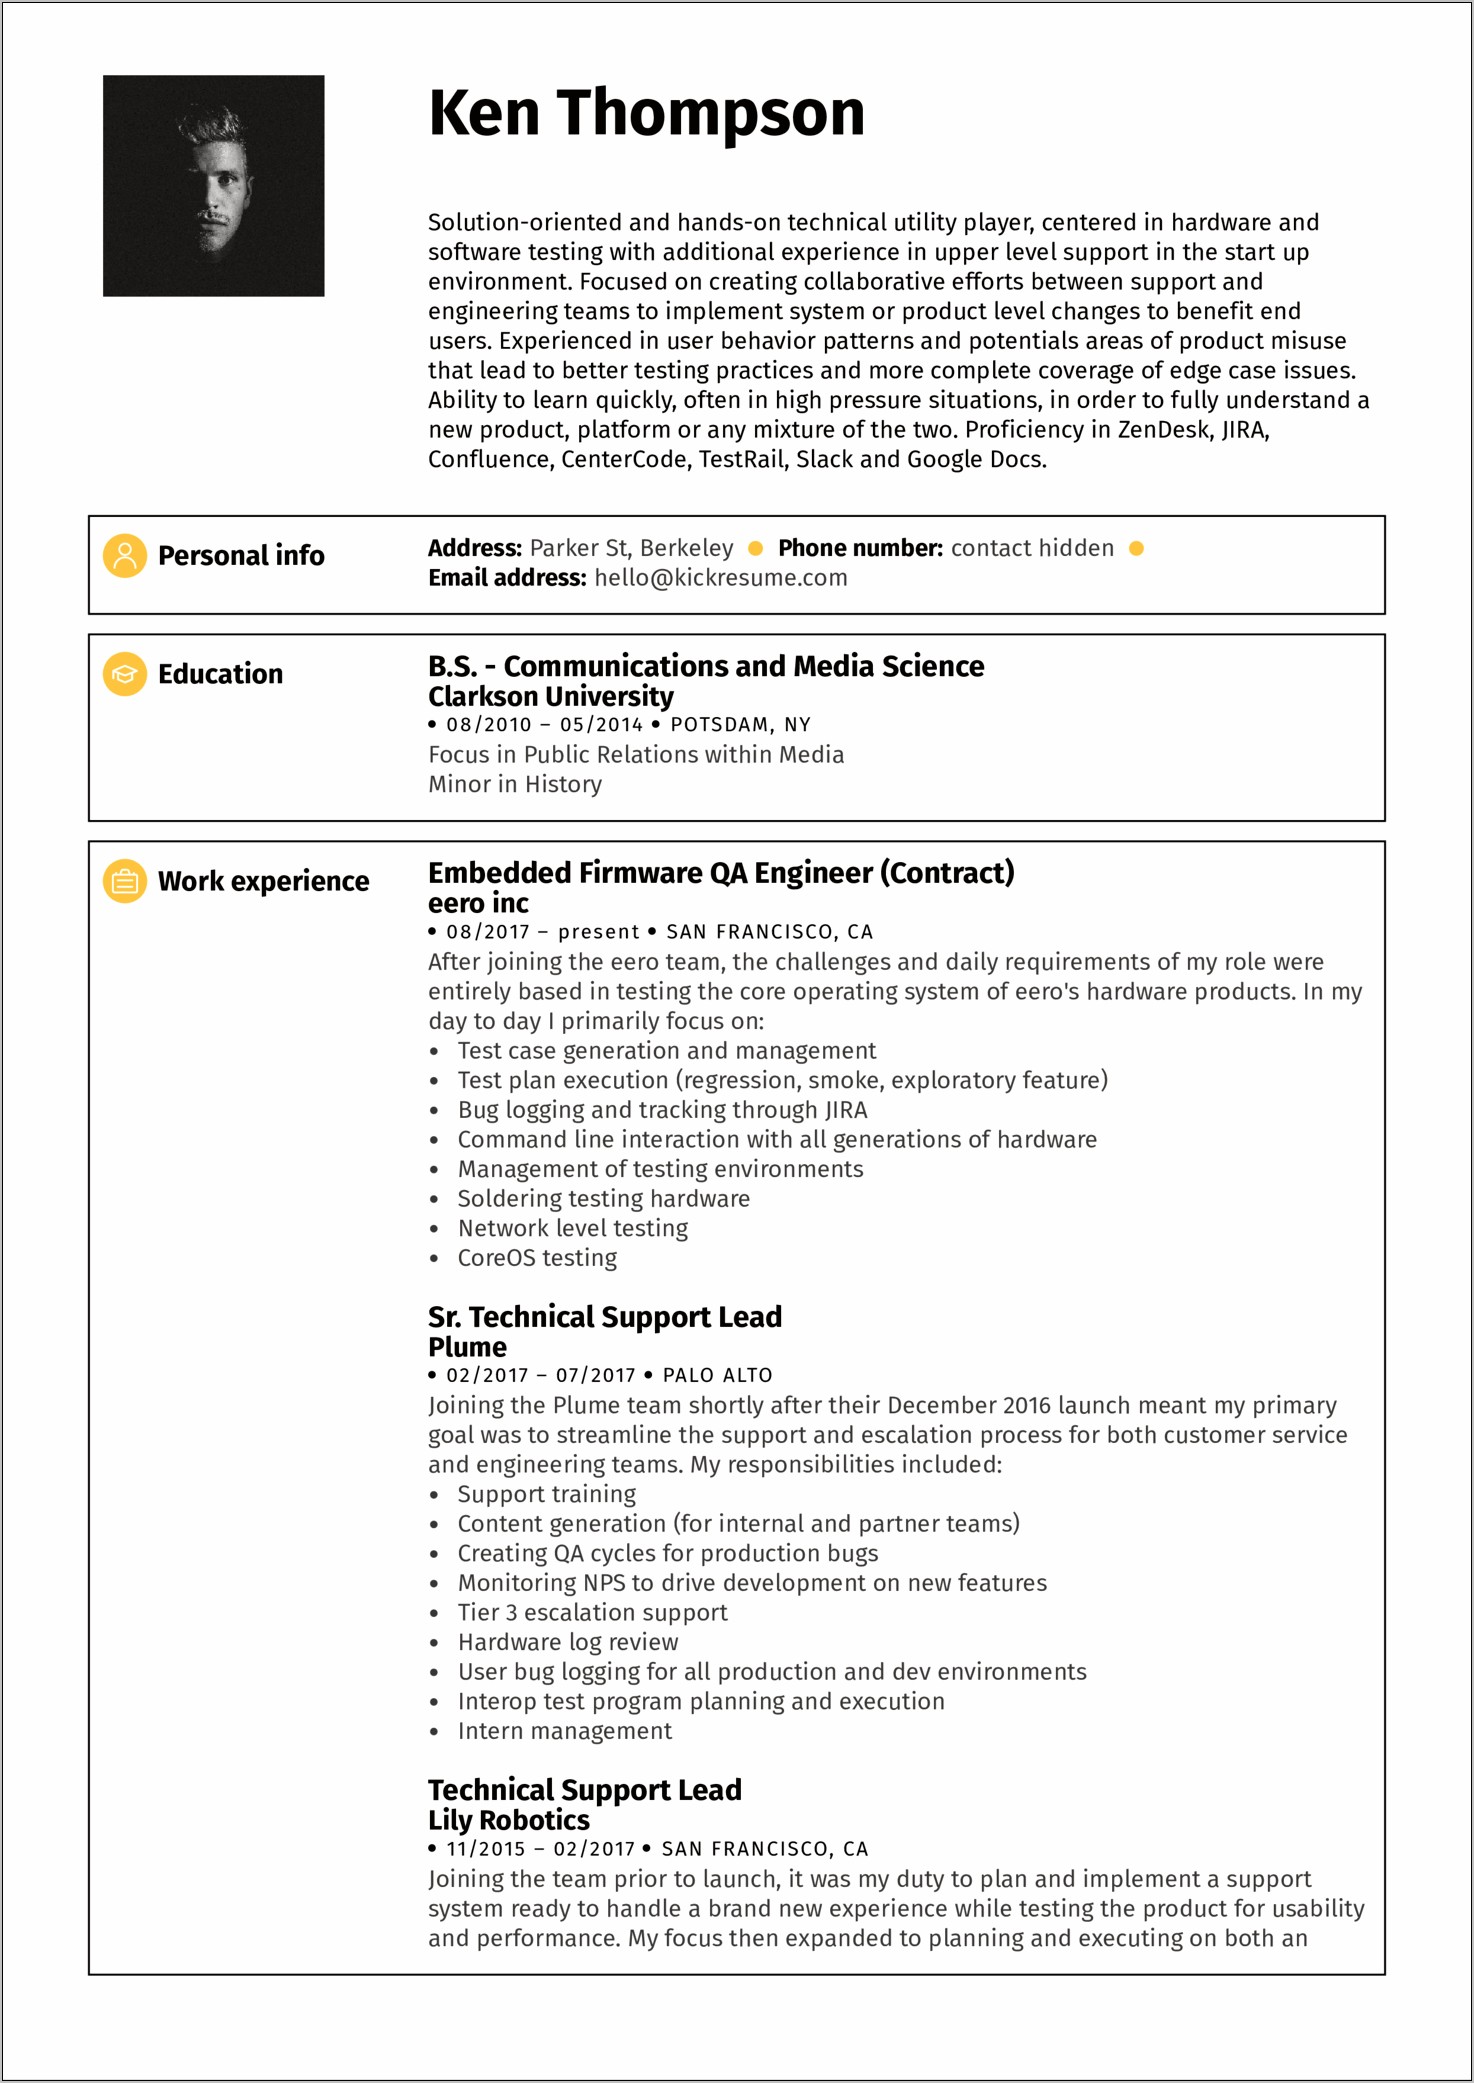 Resume Summary Statement Examples For Civil Engineer